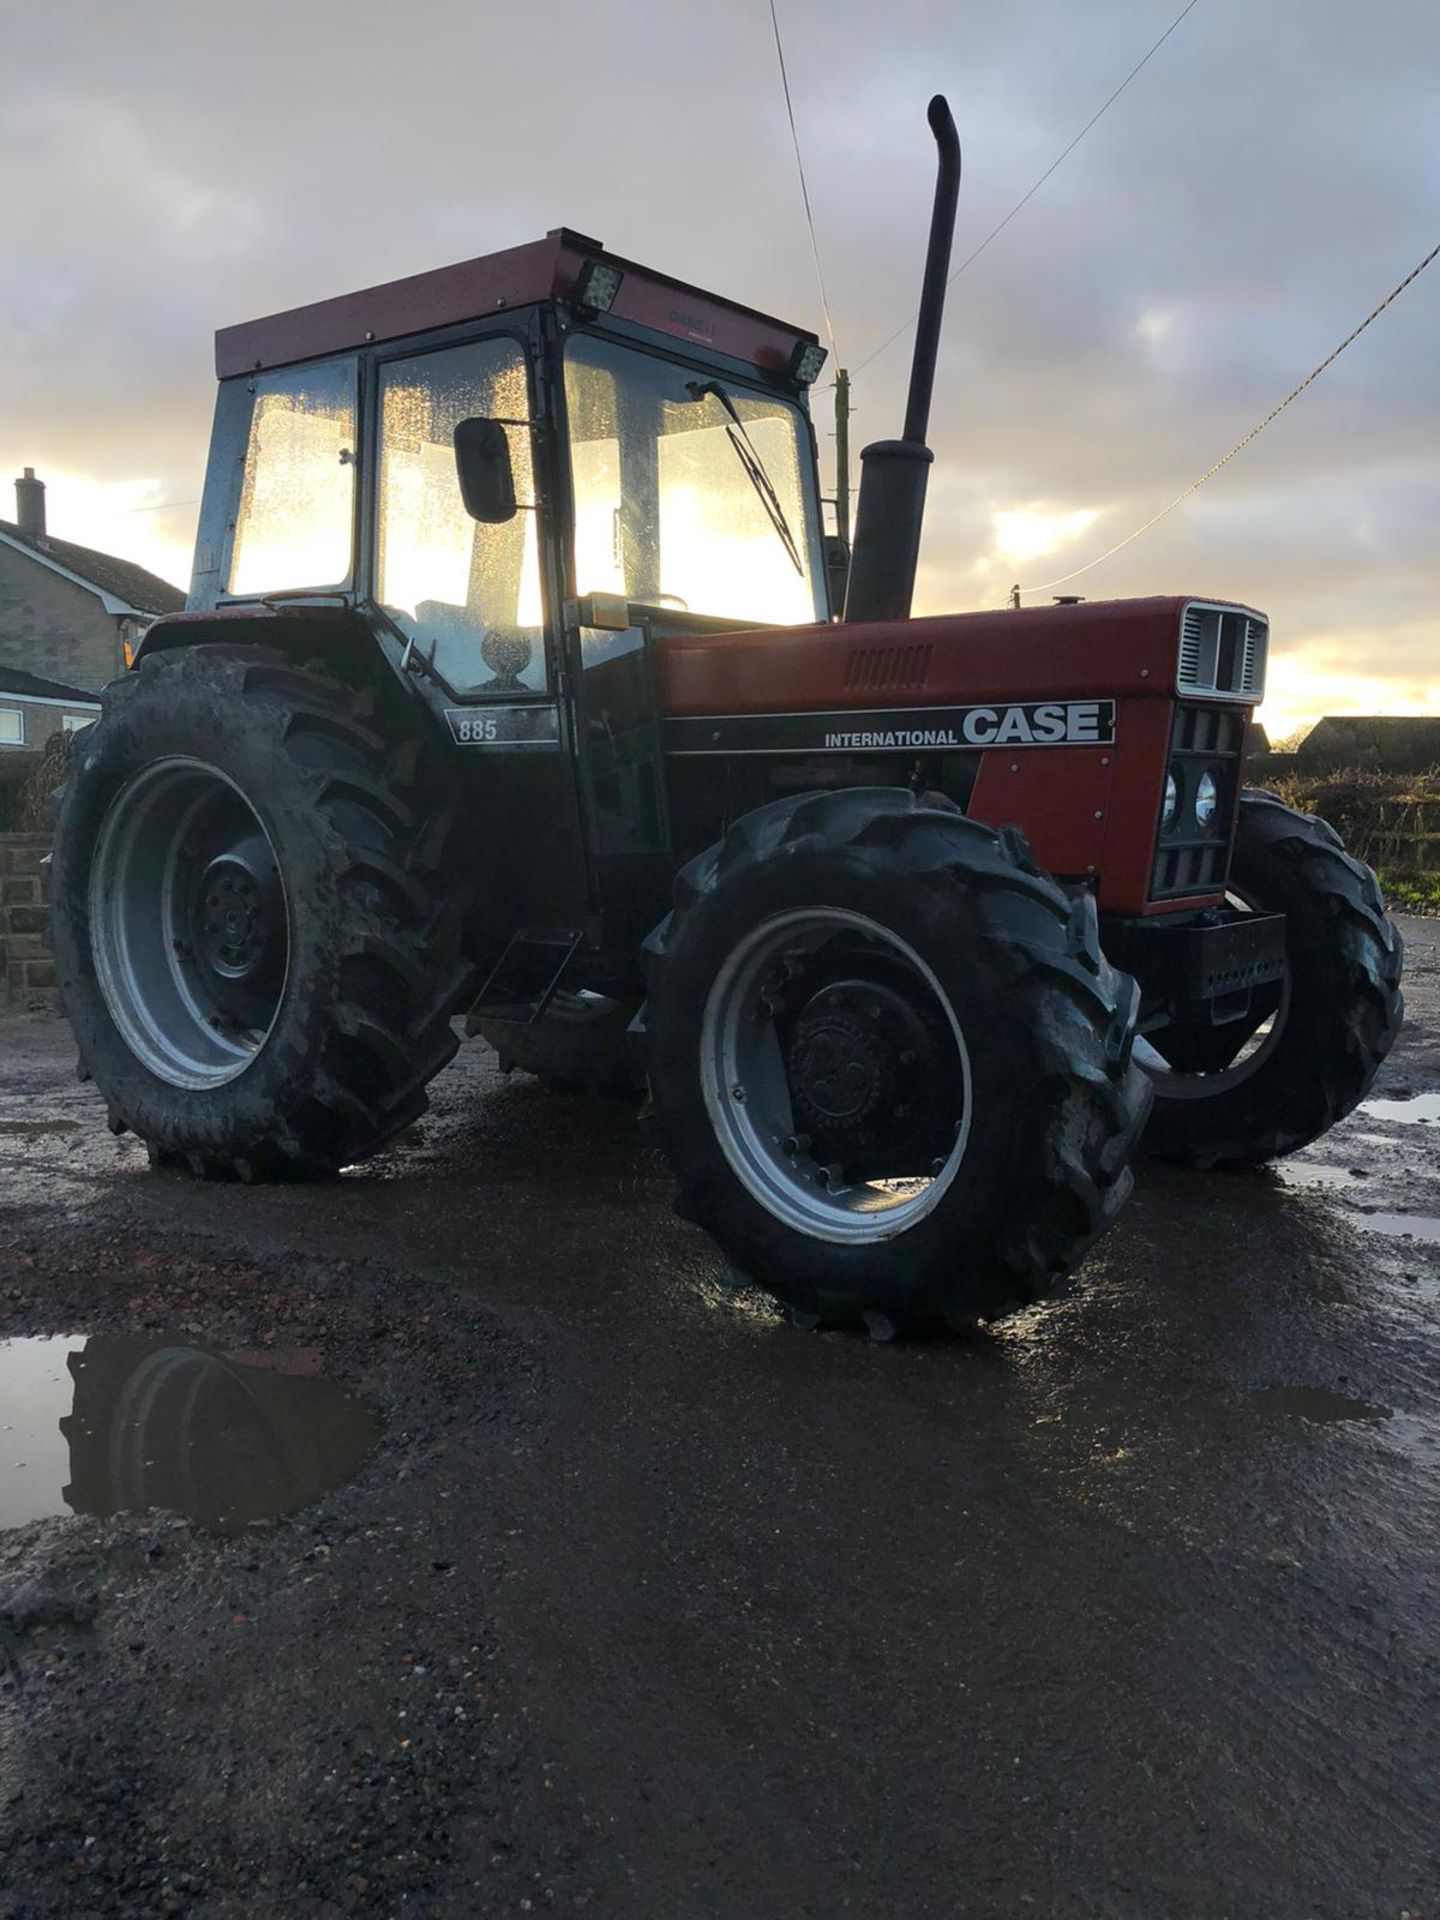 1985/C REG CASE INTERNATIONAL 885 DIESEL RED TRACTOR, RUNS AND WORKS, IN GOOD CONDITION *PLUS VAT* - Image 3 of 9